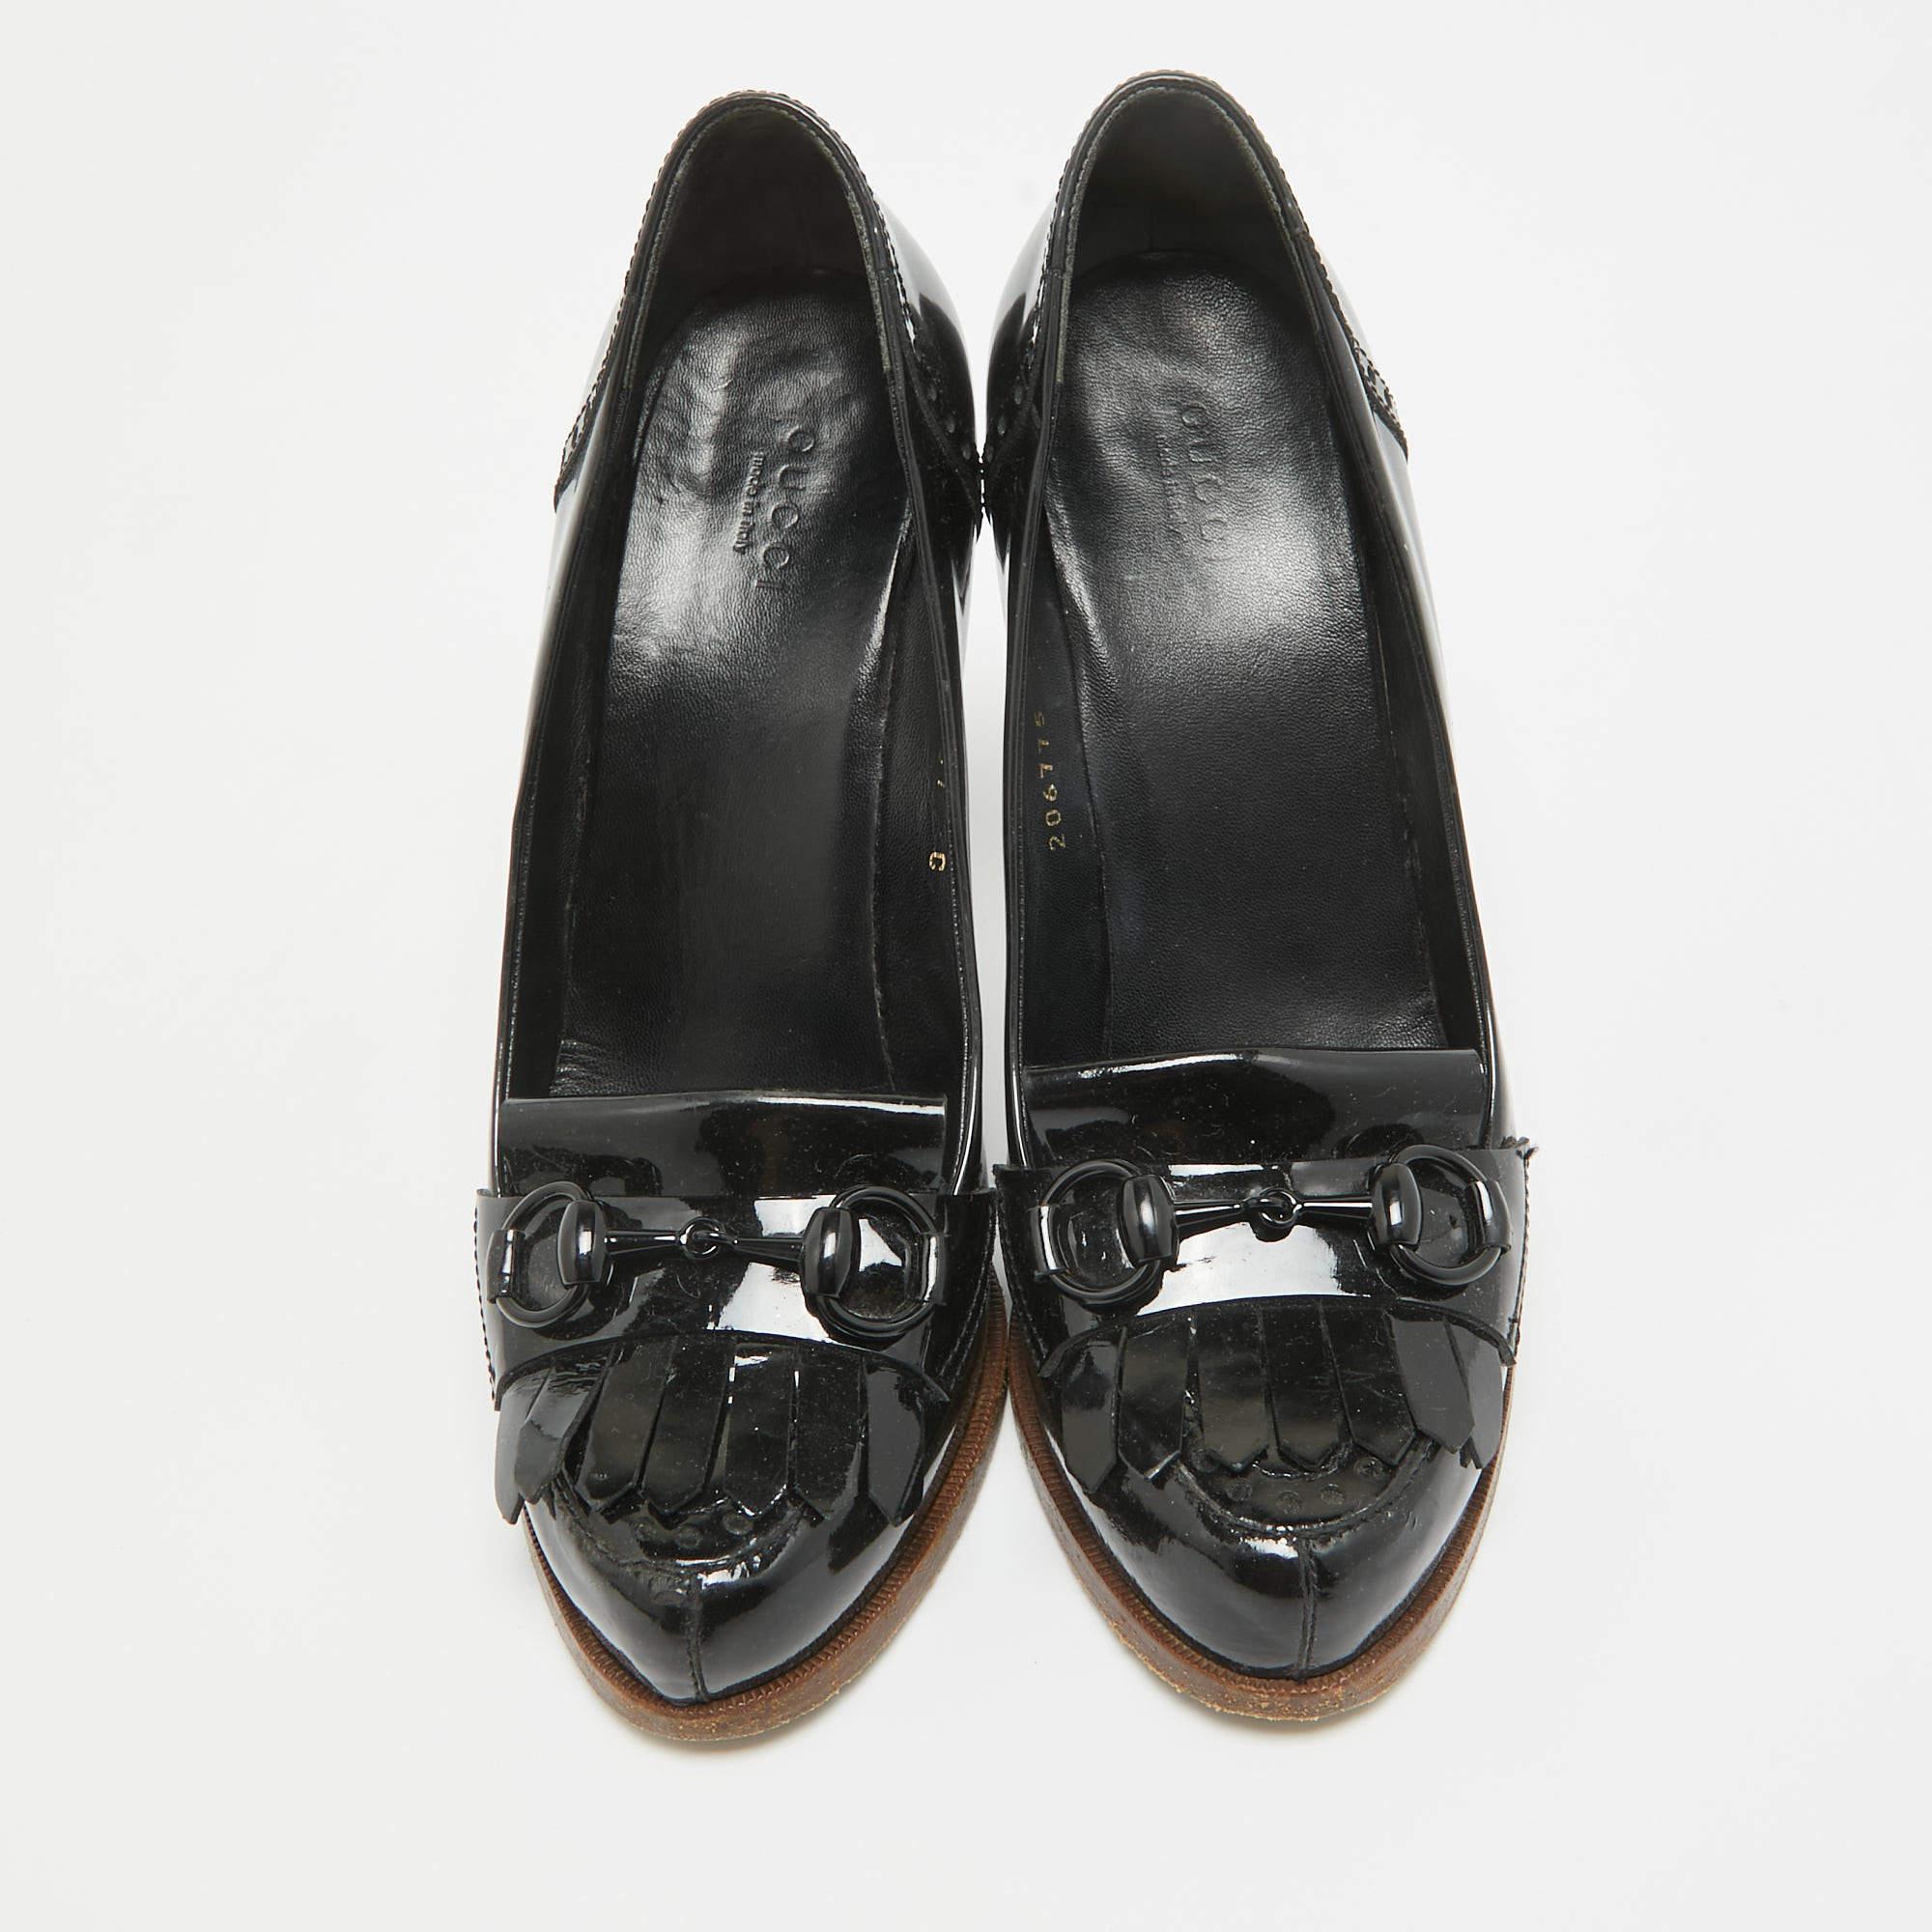 Make a statement with these Gucci black pumps for women. Impeccably crafted, these chic heels offer both fashion and comfort, elevating your look with each graceful step.

